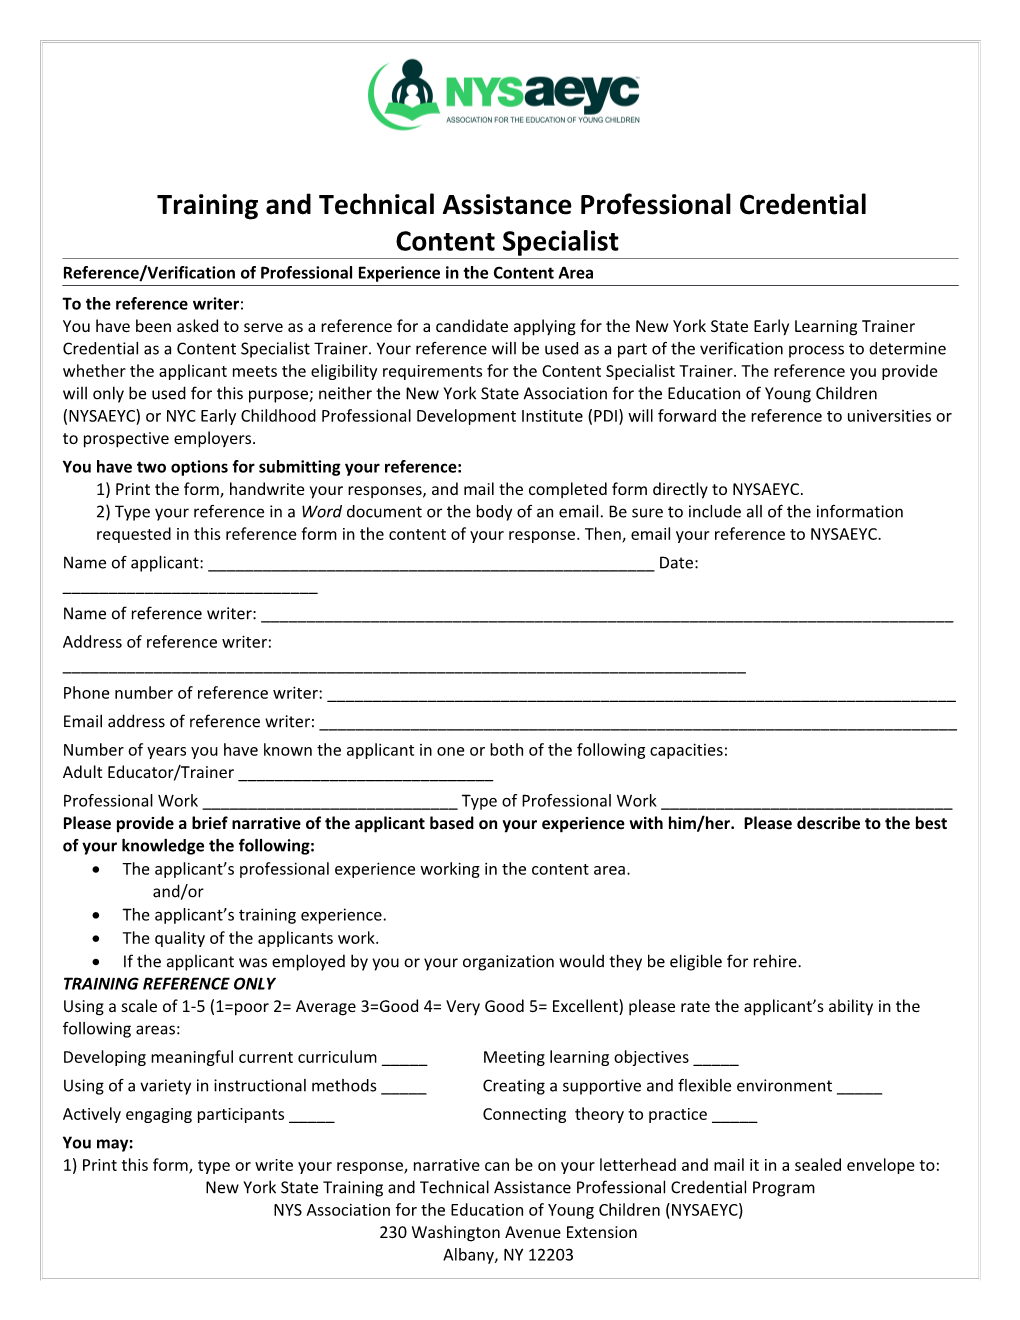 Training and Technical Assistance Professional Credential